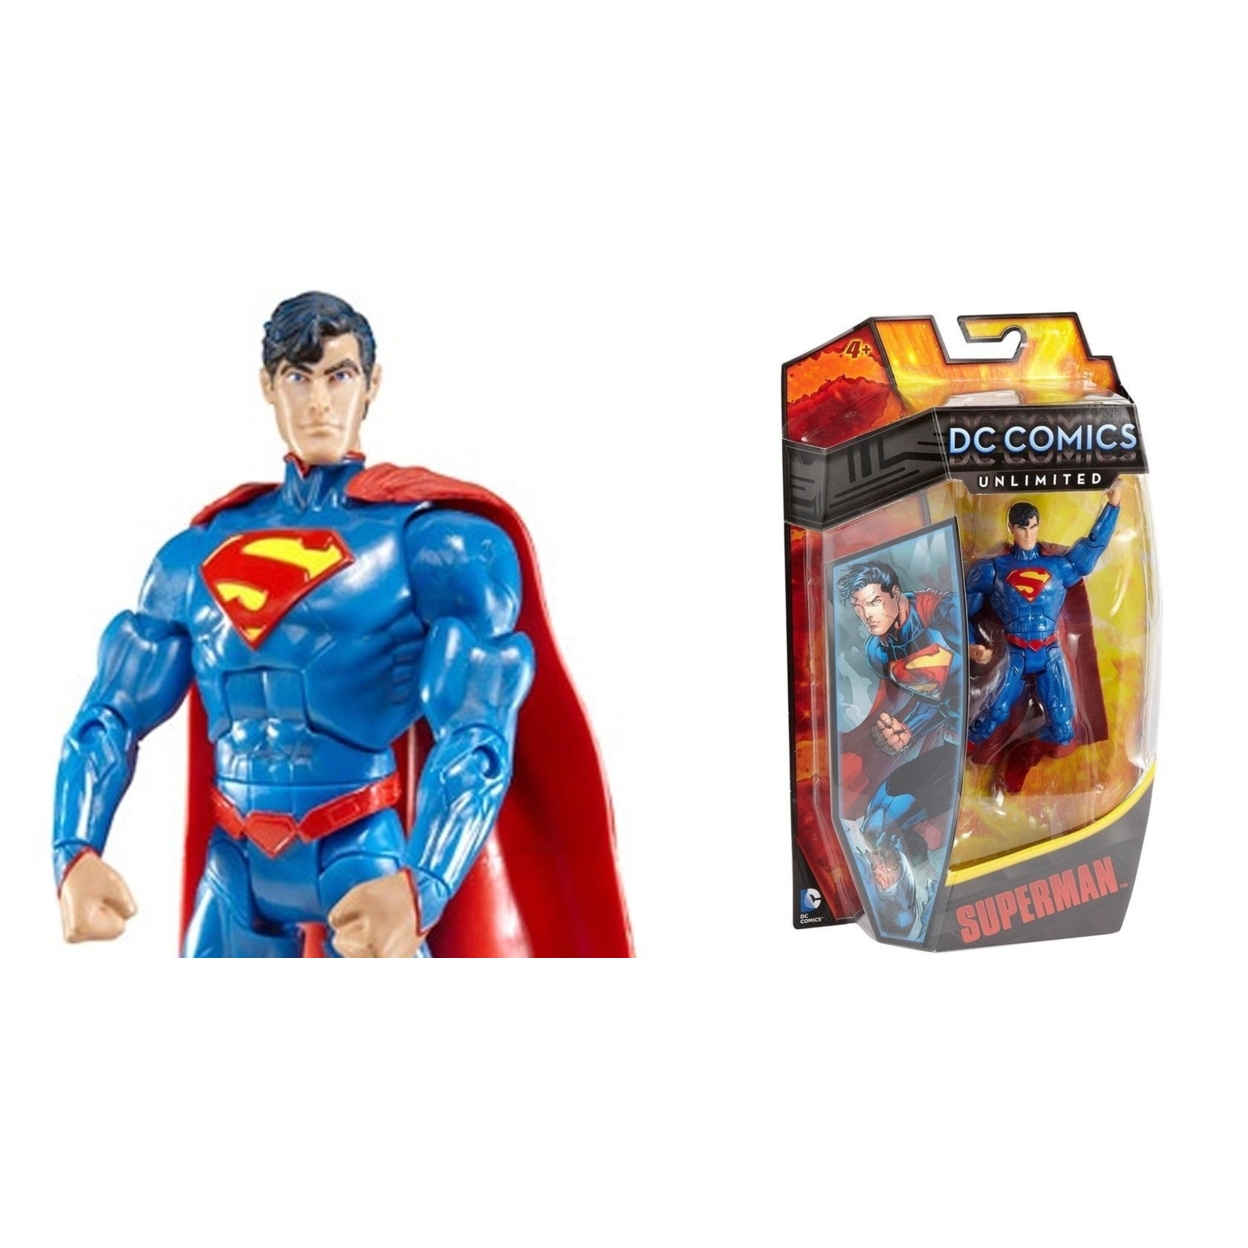 DC Comics Unlimited Superman Action Figure Collector Toy Justice Hero Mattel - image 4 of 4